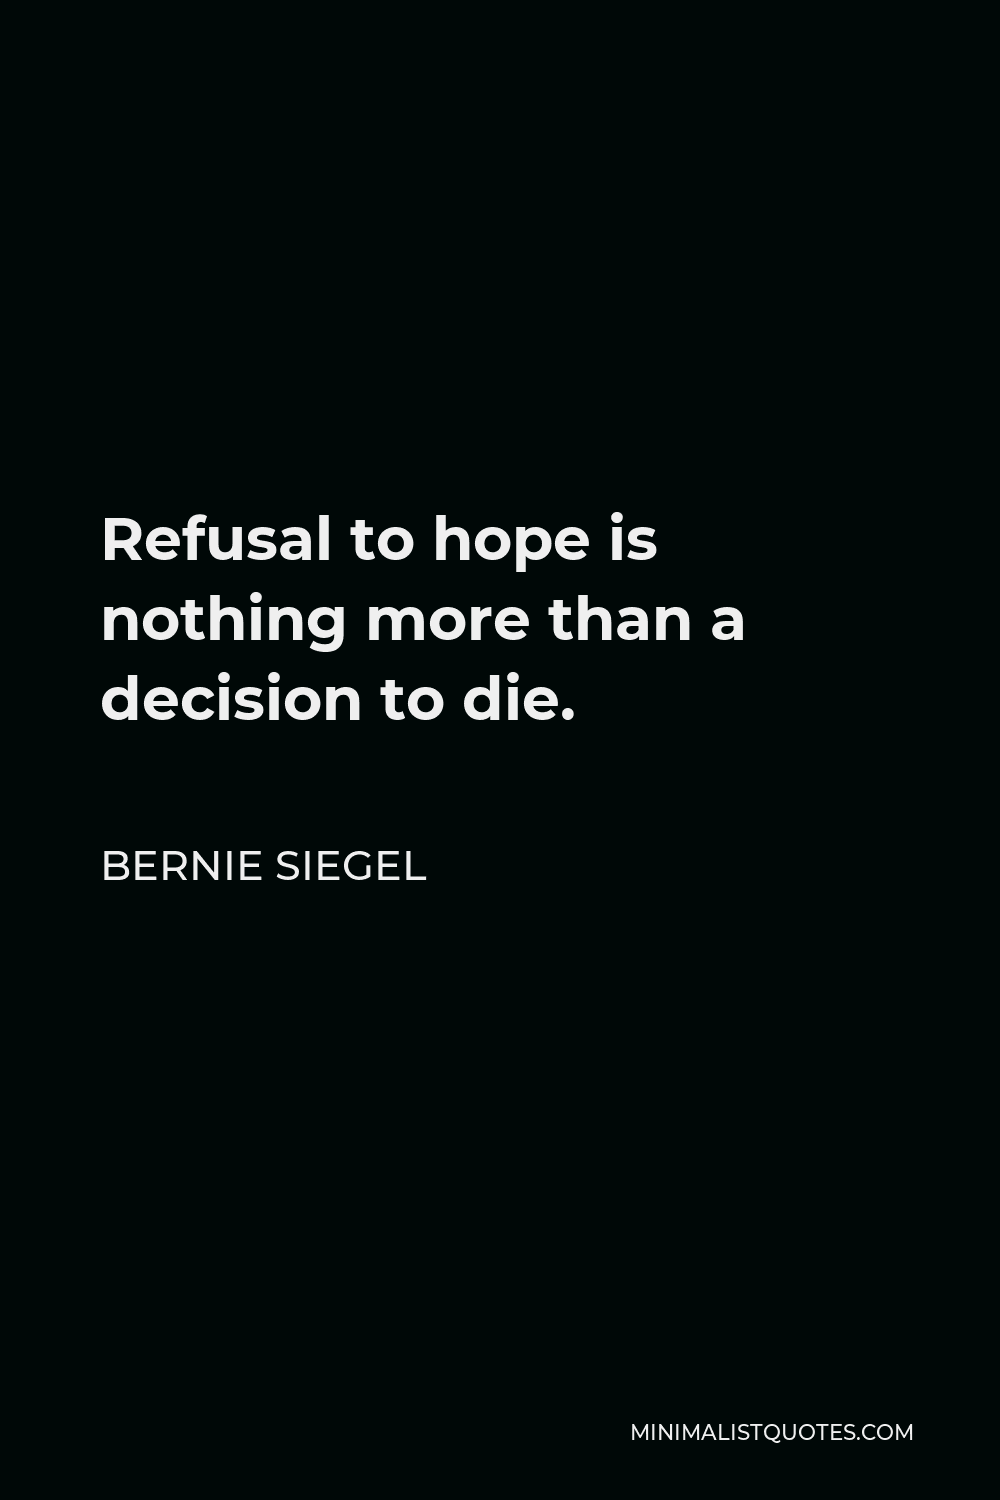 Bernie Siegel Quote - Refusal to hope is nothing more than a decision to die.